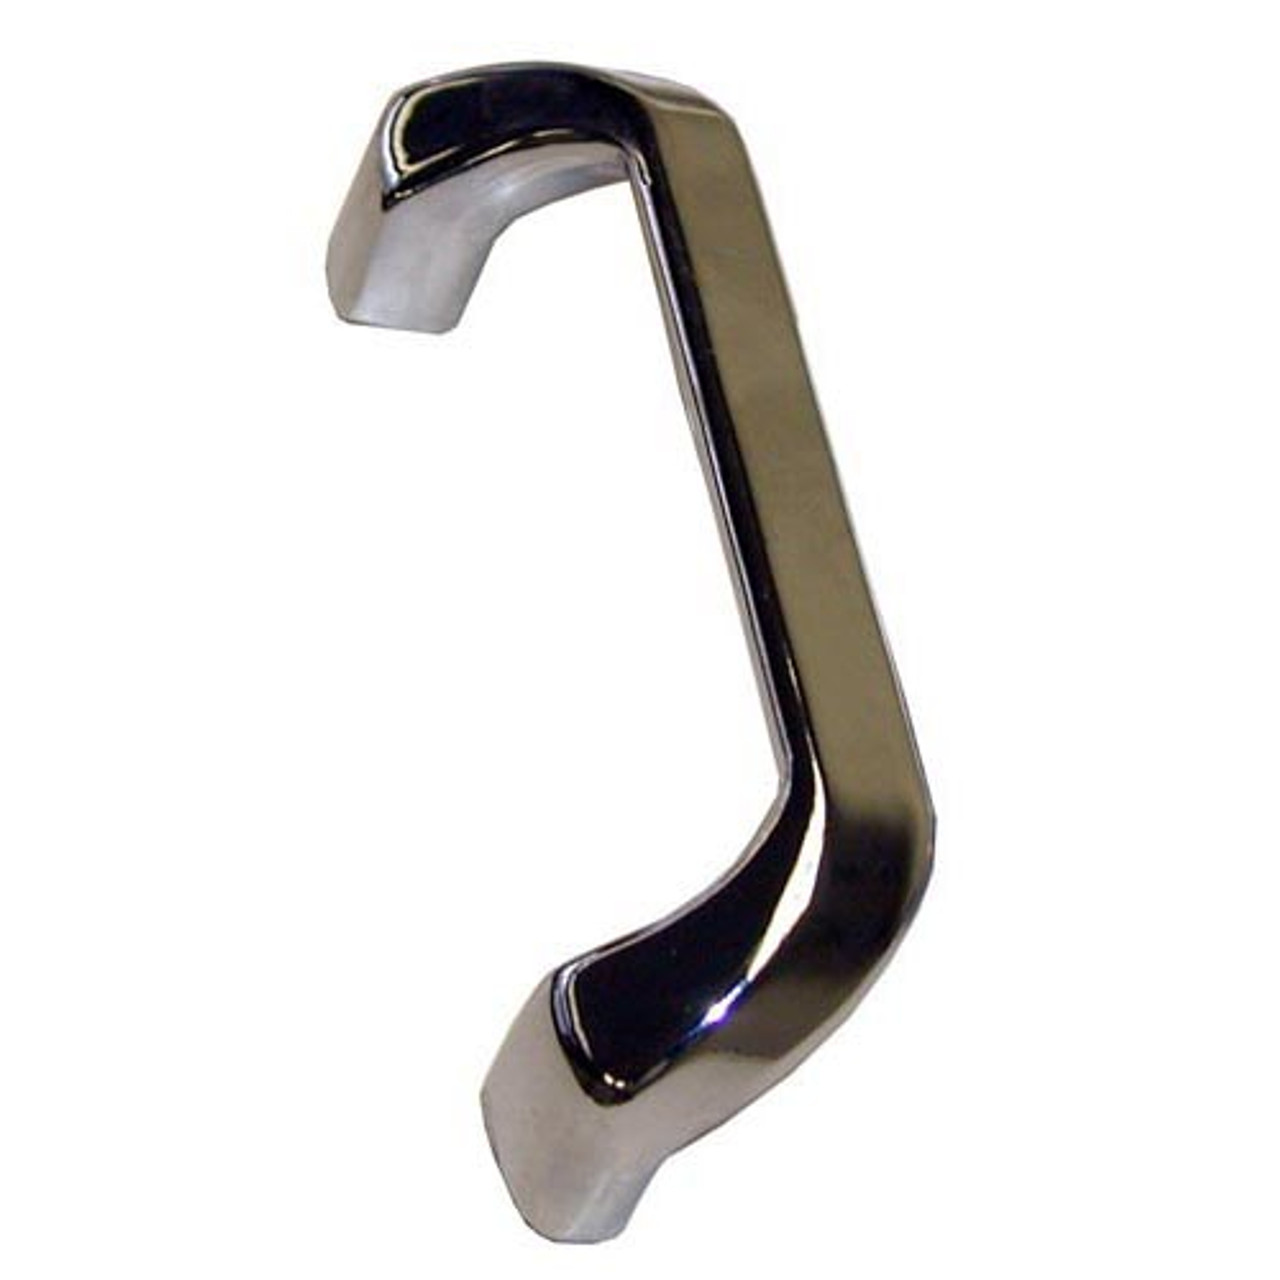 CHG (Component Hardware Group) P40-1010 PULL HANDLE